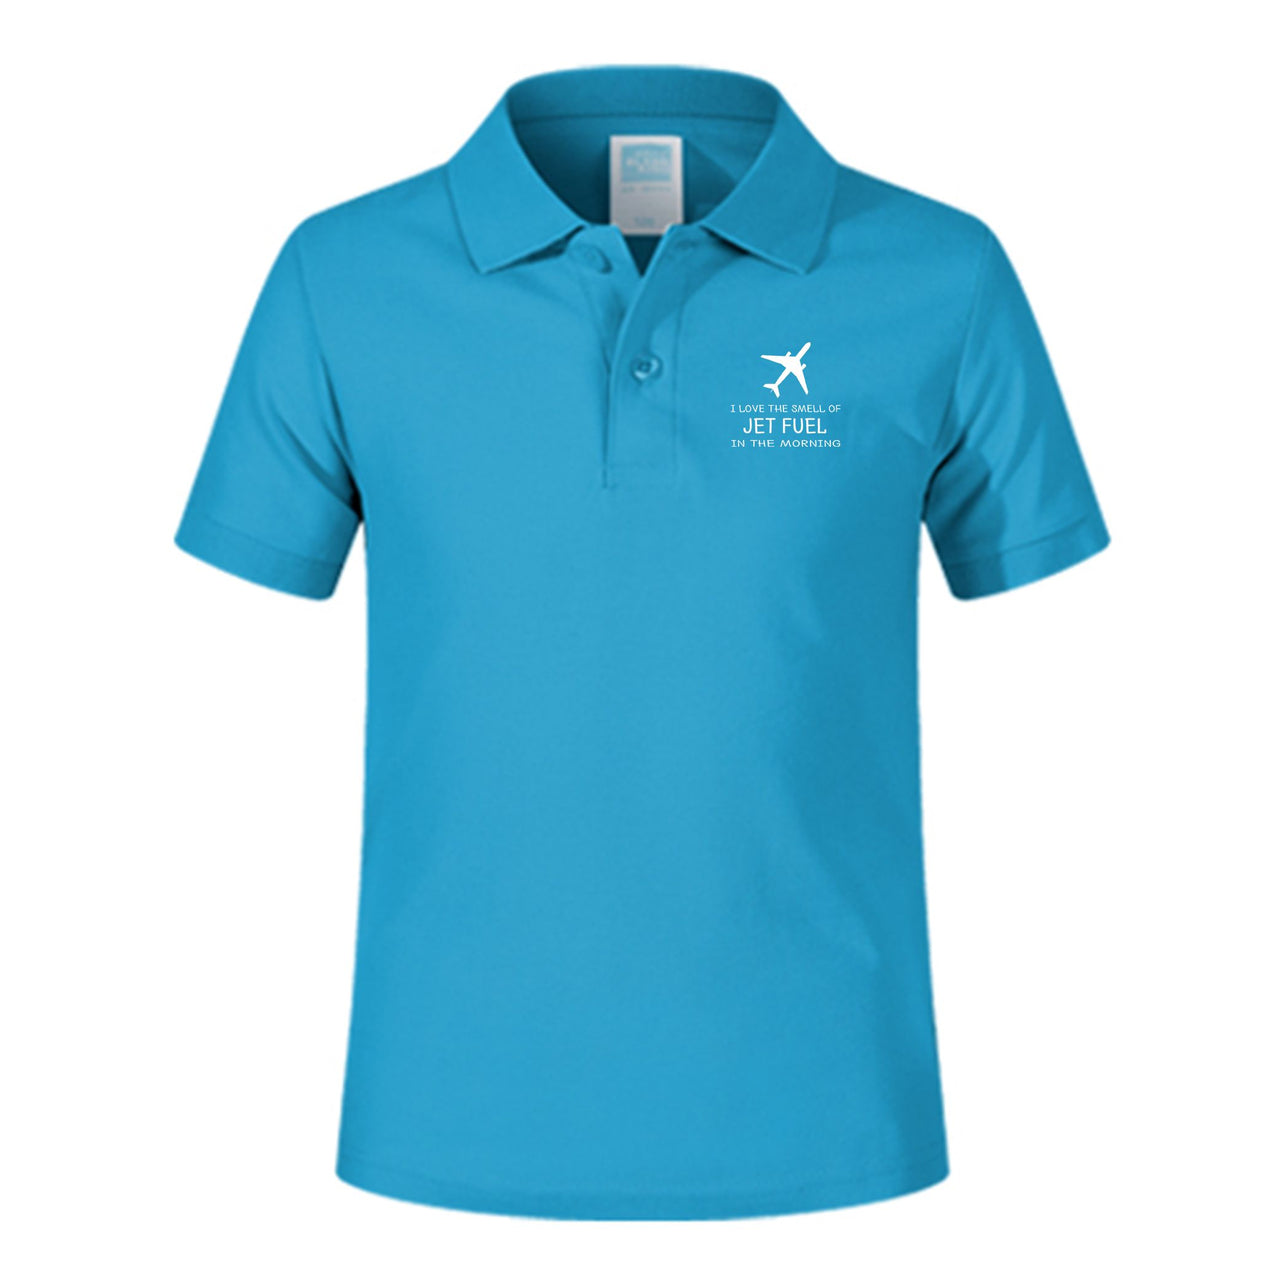 I Love The Smell Of Jet Fuel In The Morning Designed Children Polo T-Shirts